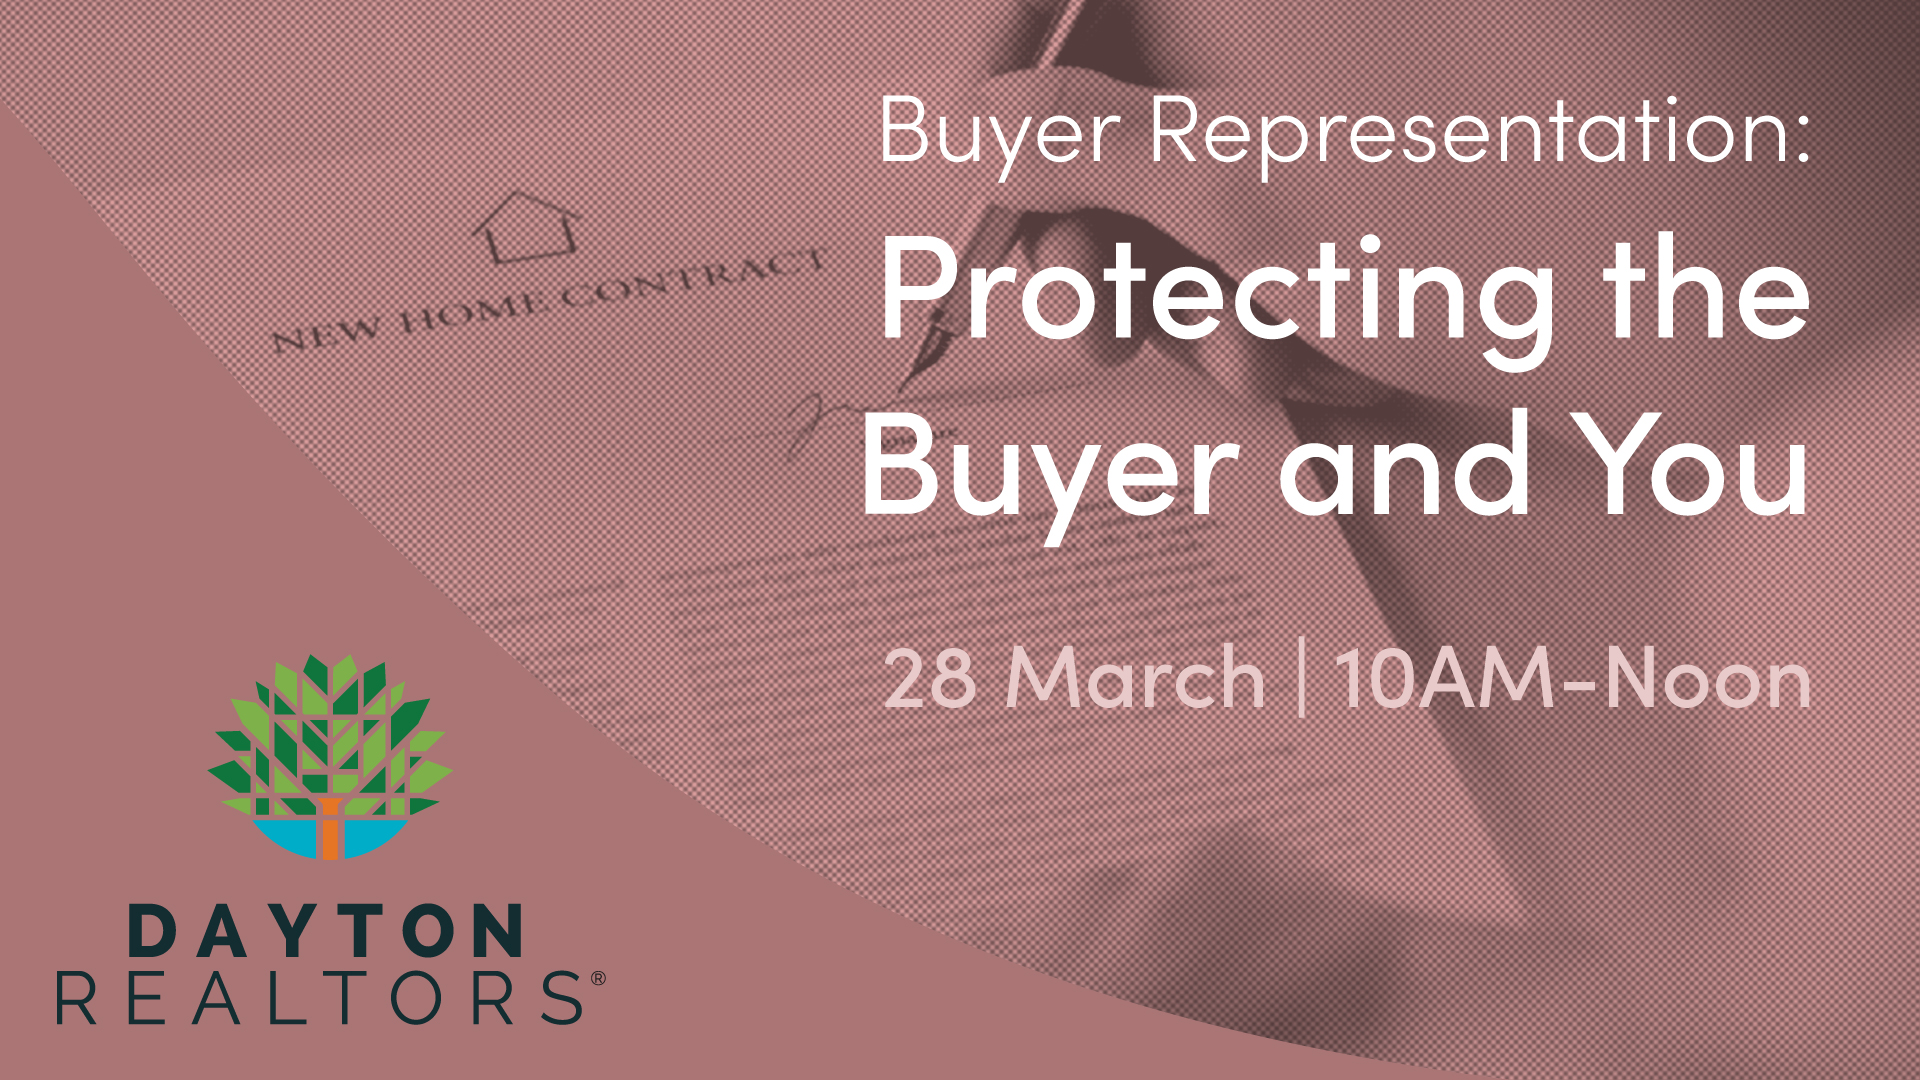 Protecting the Buyer and You - March 28